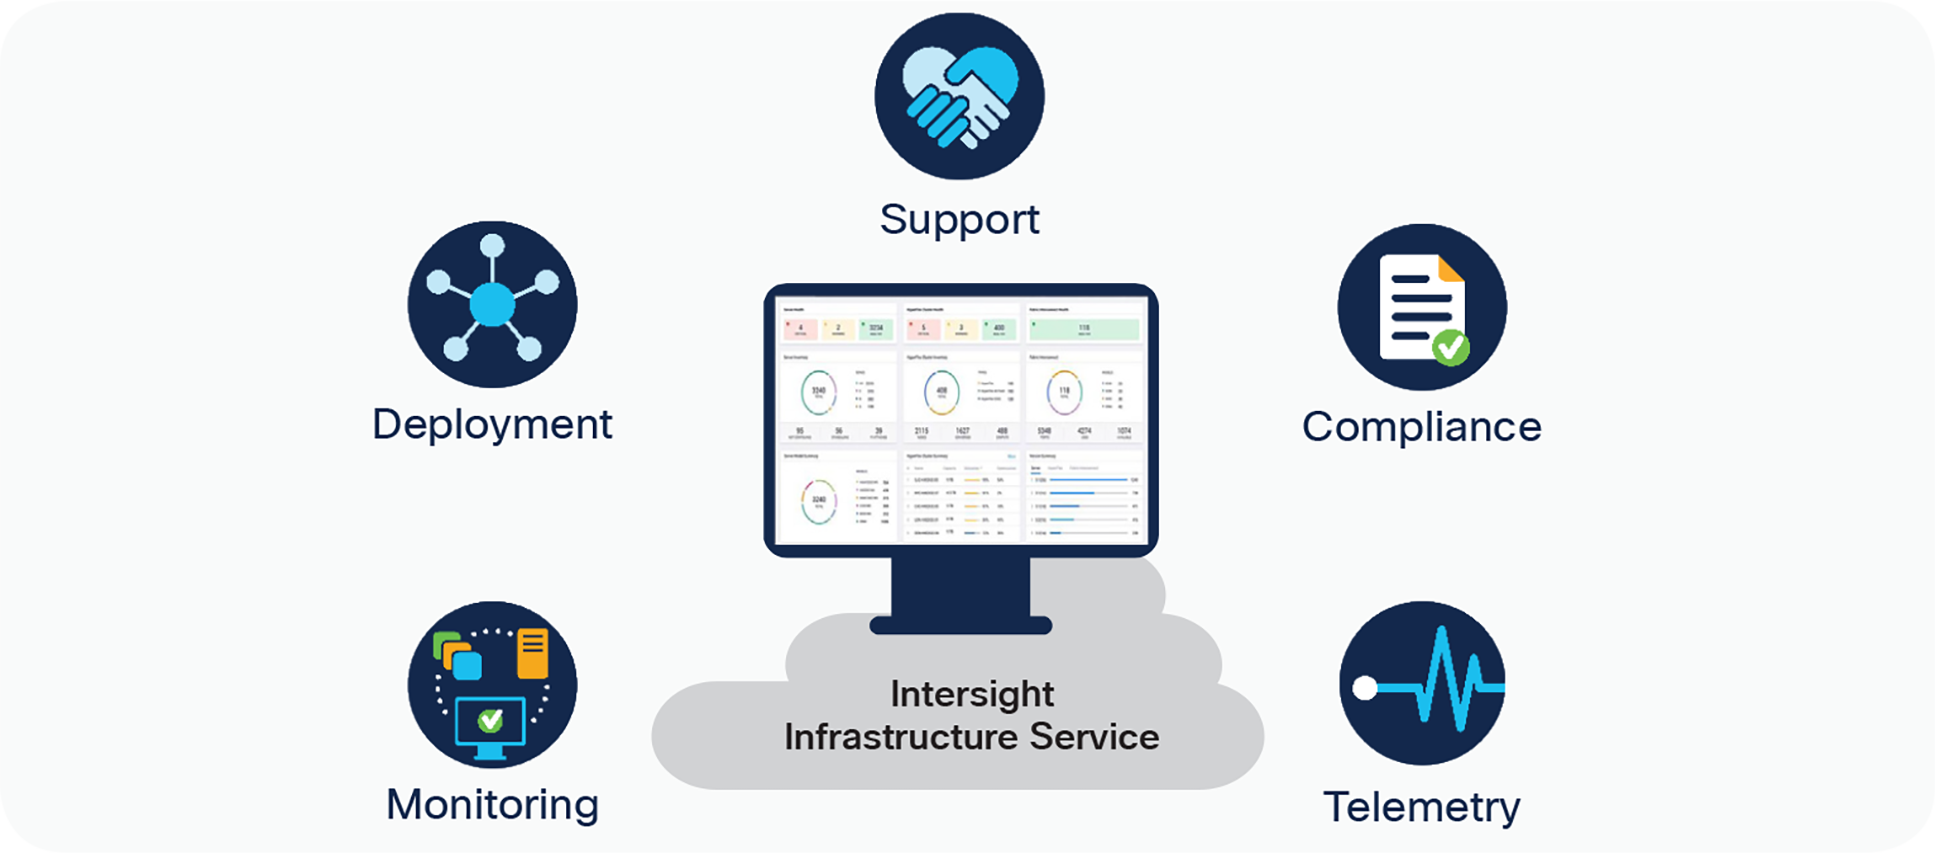 Ways to use Intersight Infrastructure Service